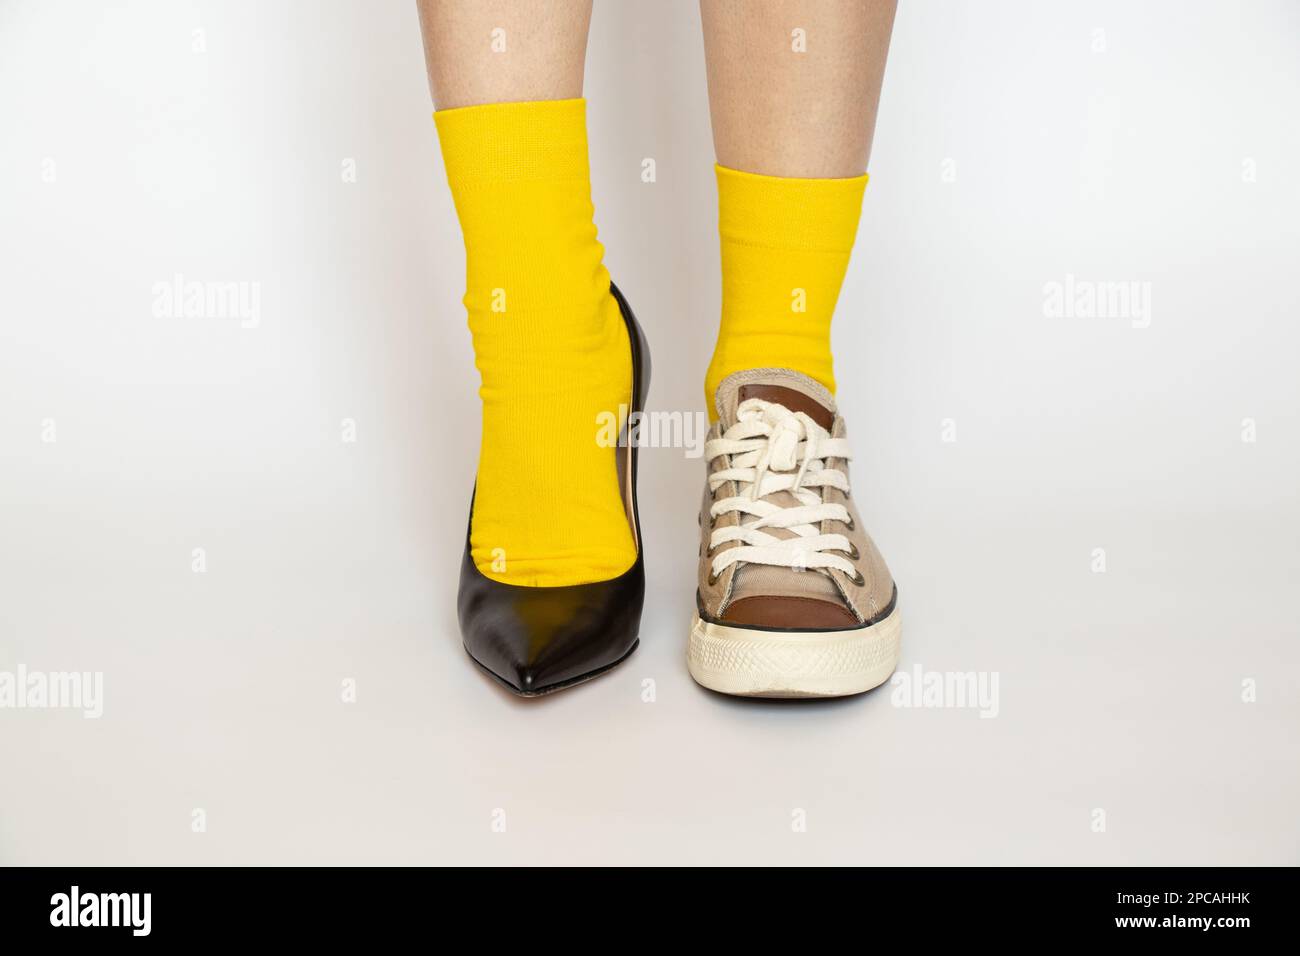 Different shoes on the girl's legs, high heeled shoes and sports sneakers in yellow socks on a white background, fashion Stock Photo